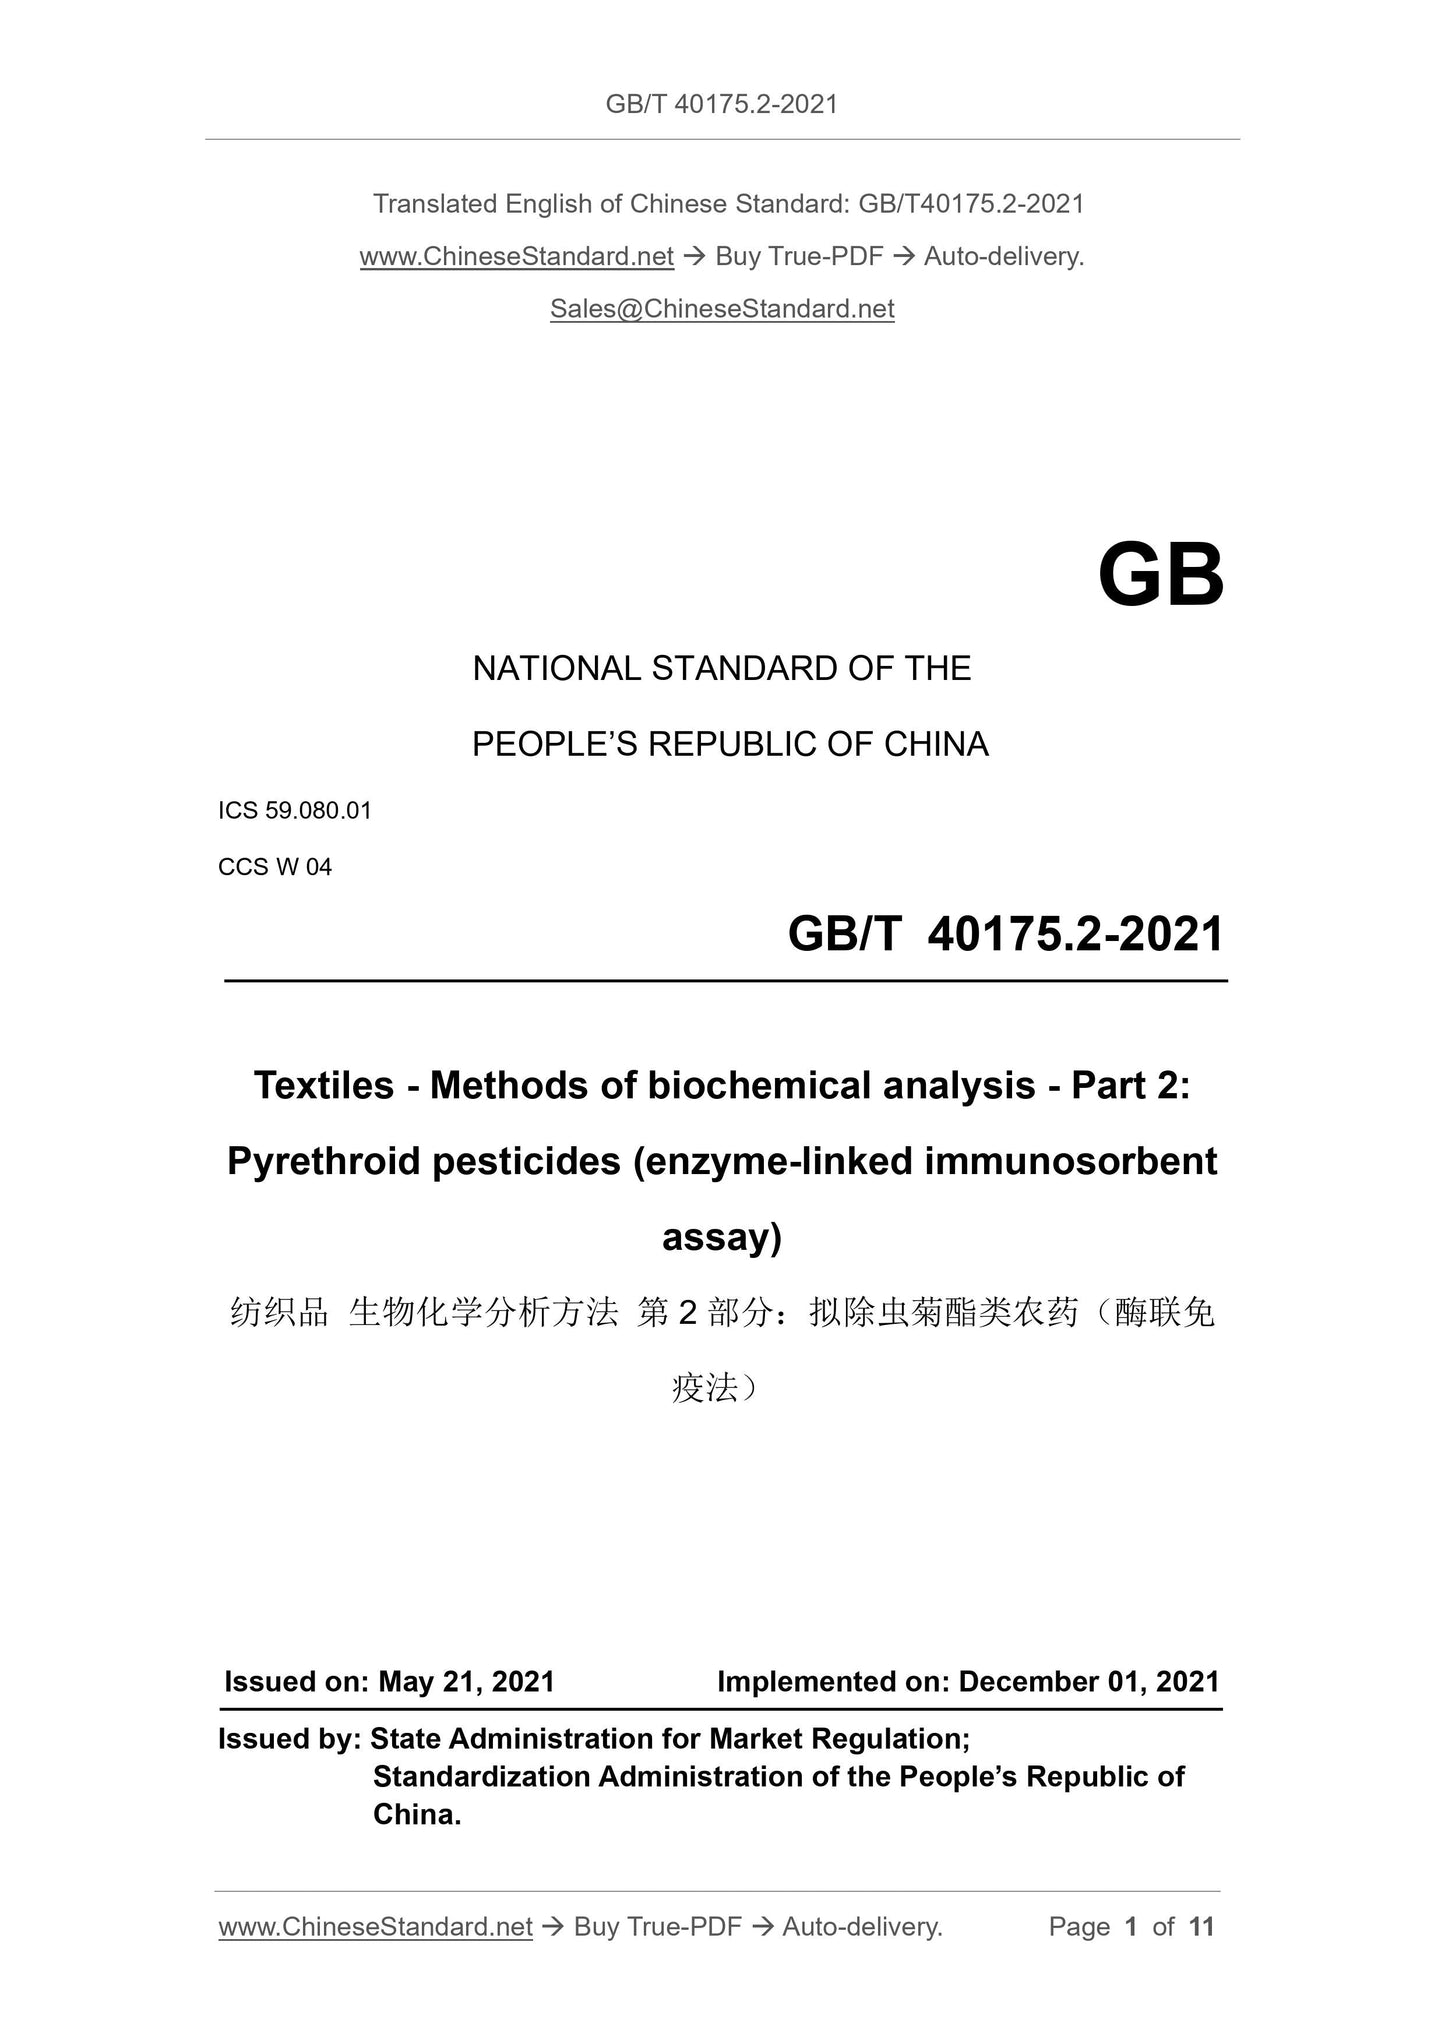 GB/T 40175.2-2021 Page 1